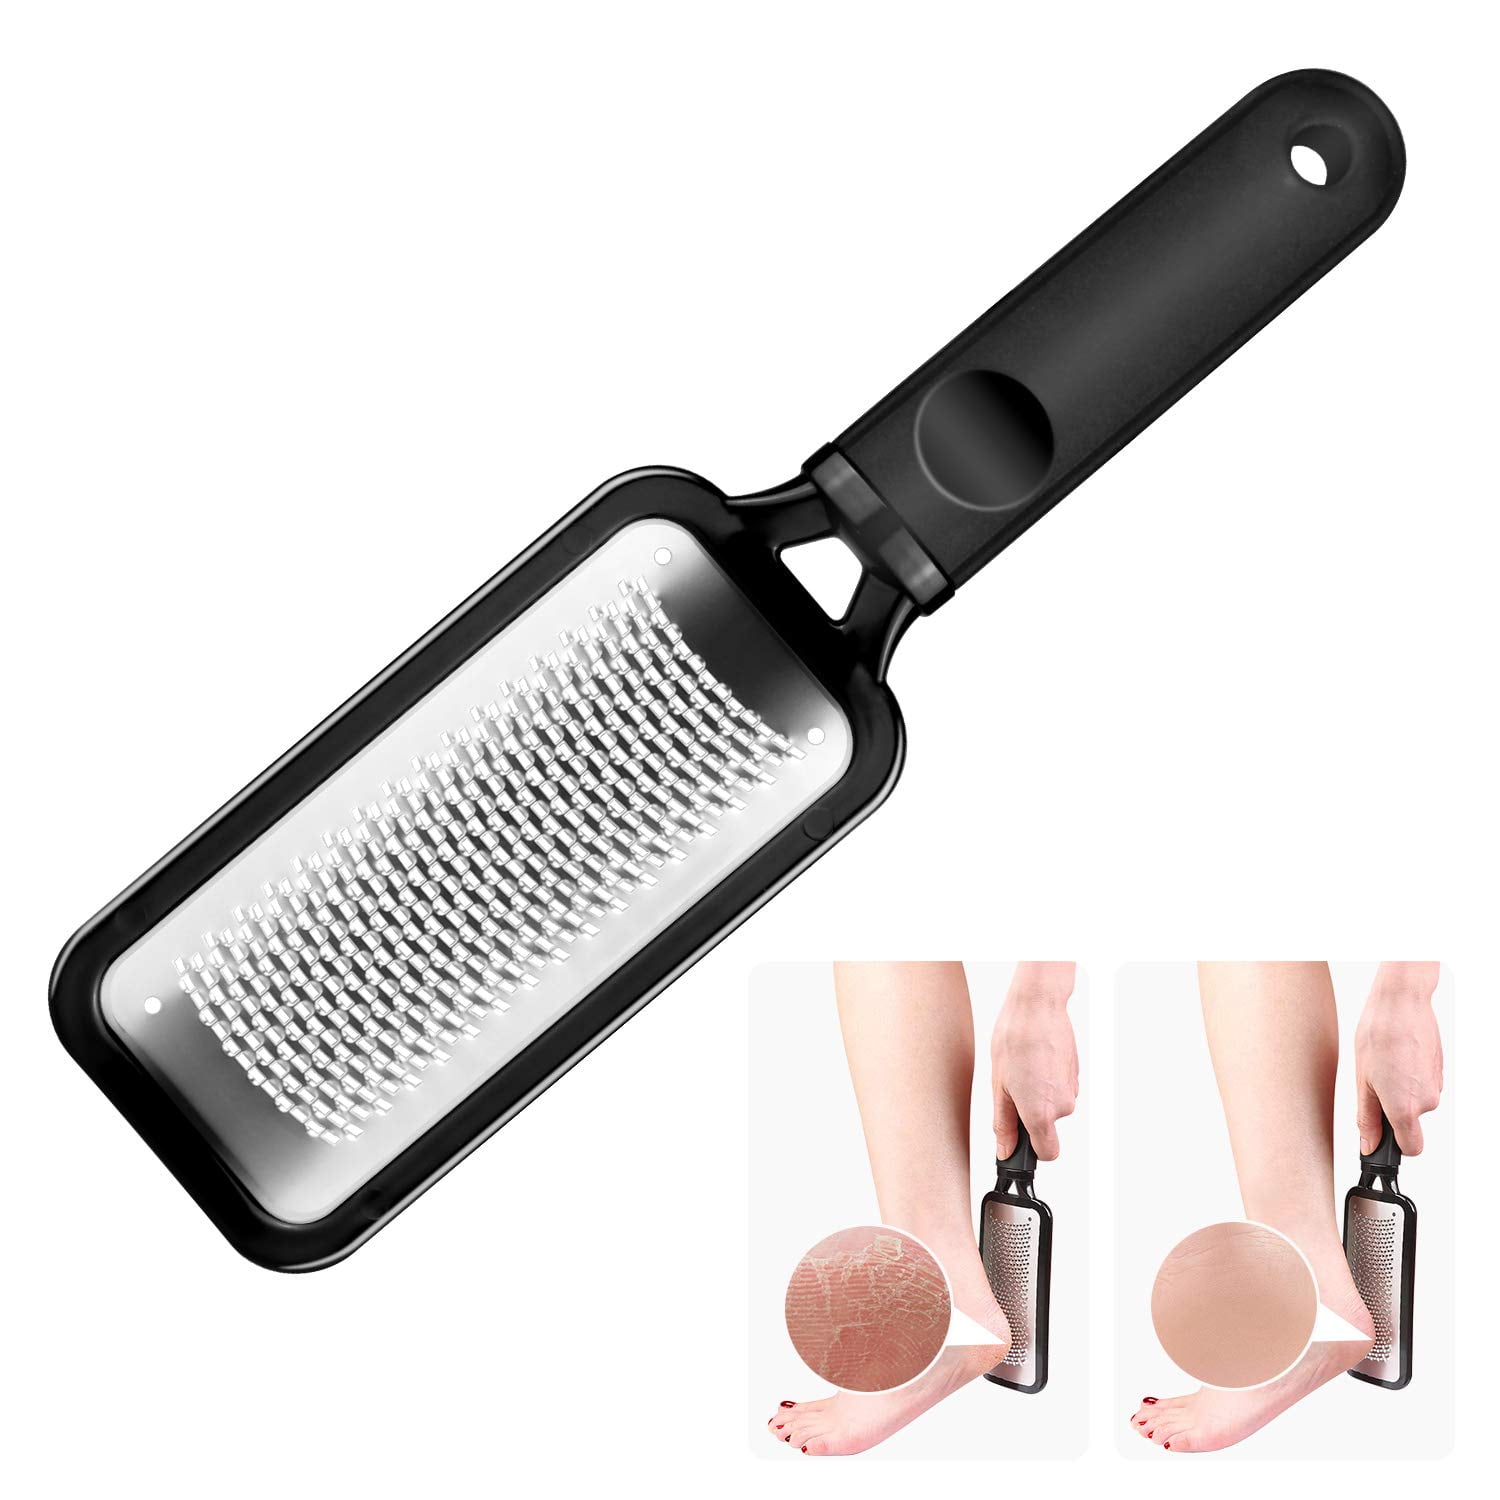 Niuta Colossal Foot Rasp Foot File and Callus Remover, Surgical Grade Stainless Steel File, Can Be used on Trimming Dead Skin, Callus, Foot Corn